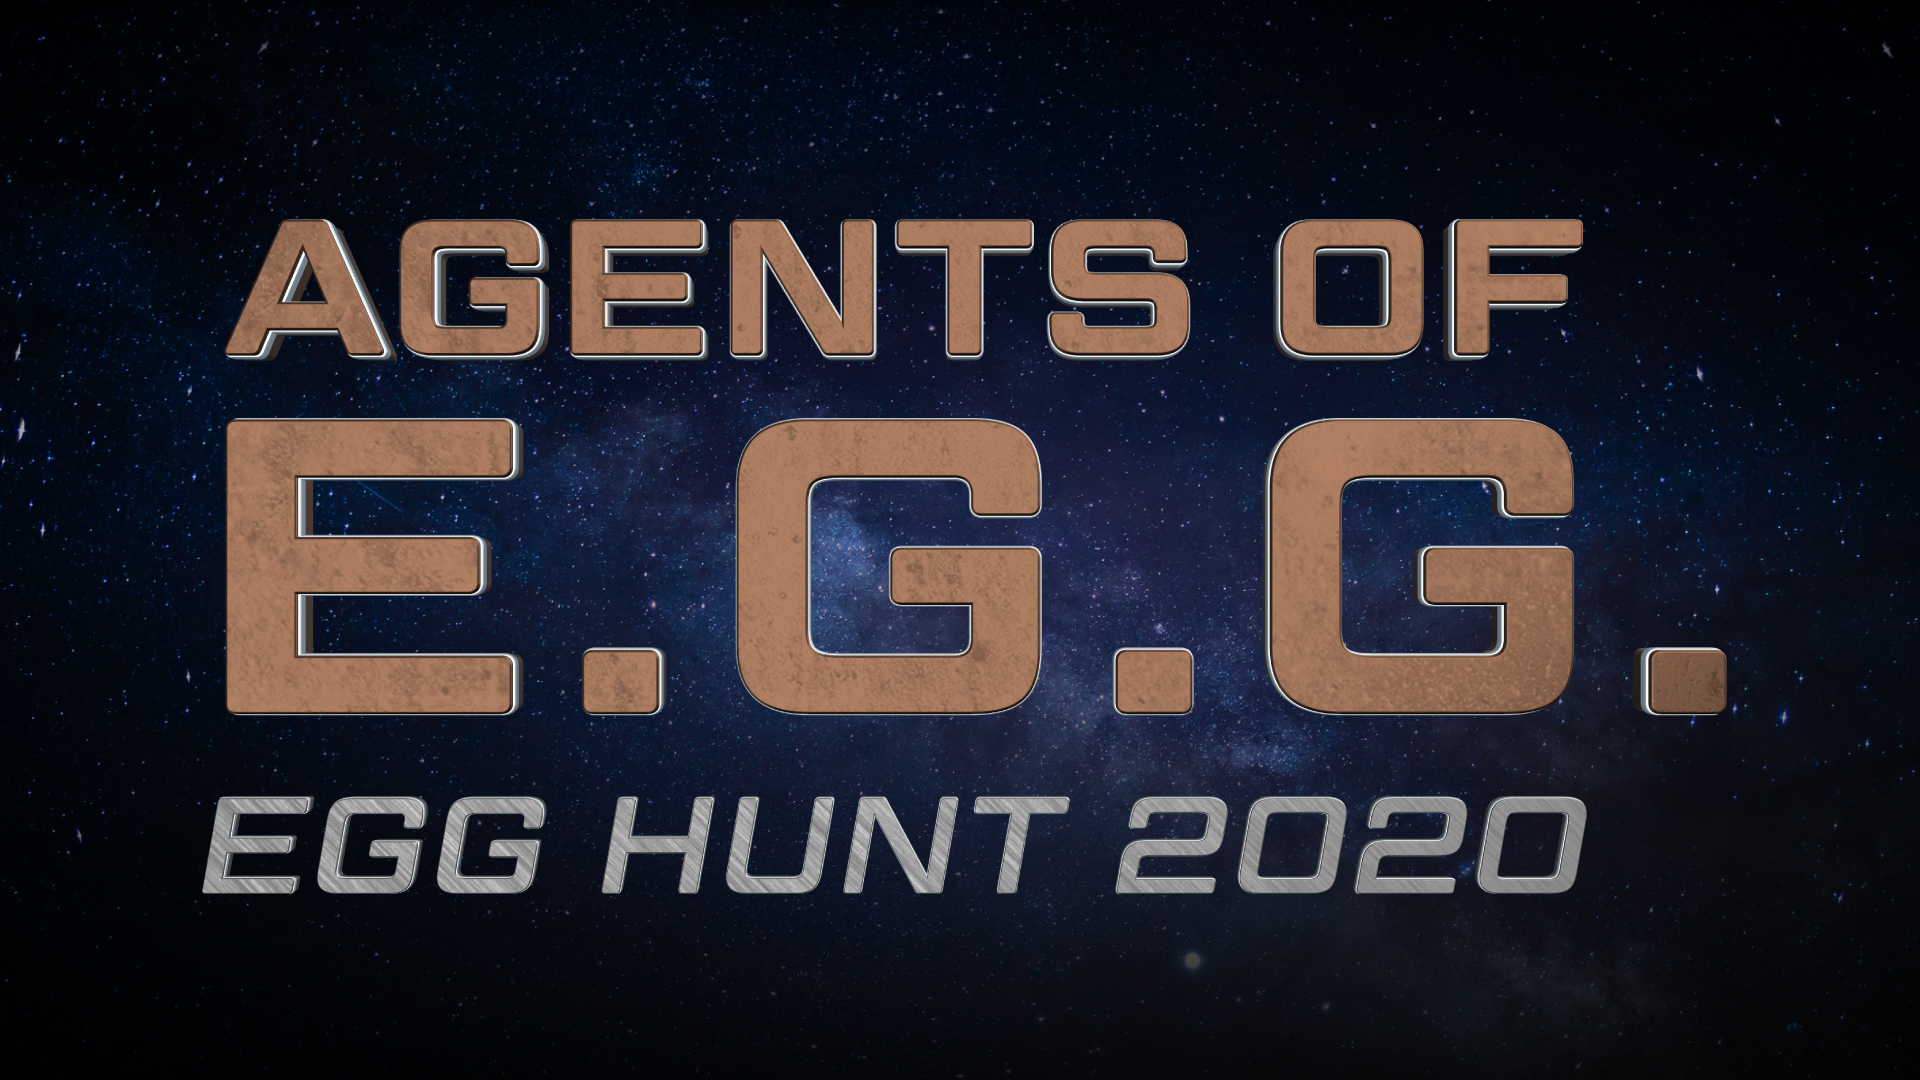 Egg Hunt 2020 Agents Of E G G Roblox Wikia Fandom - hacker rpg world codes roblox wiki roblox games that are